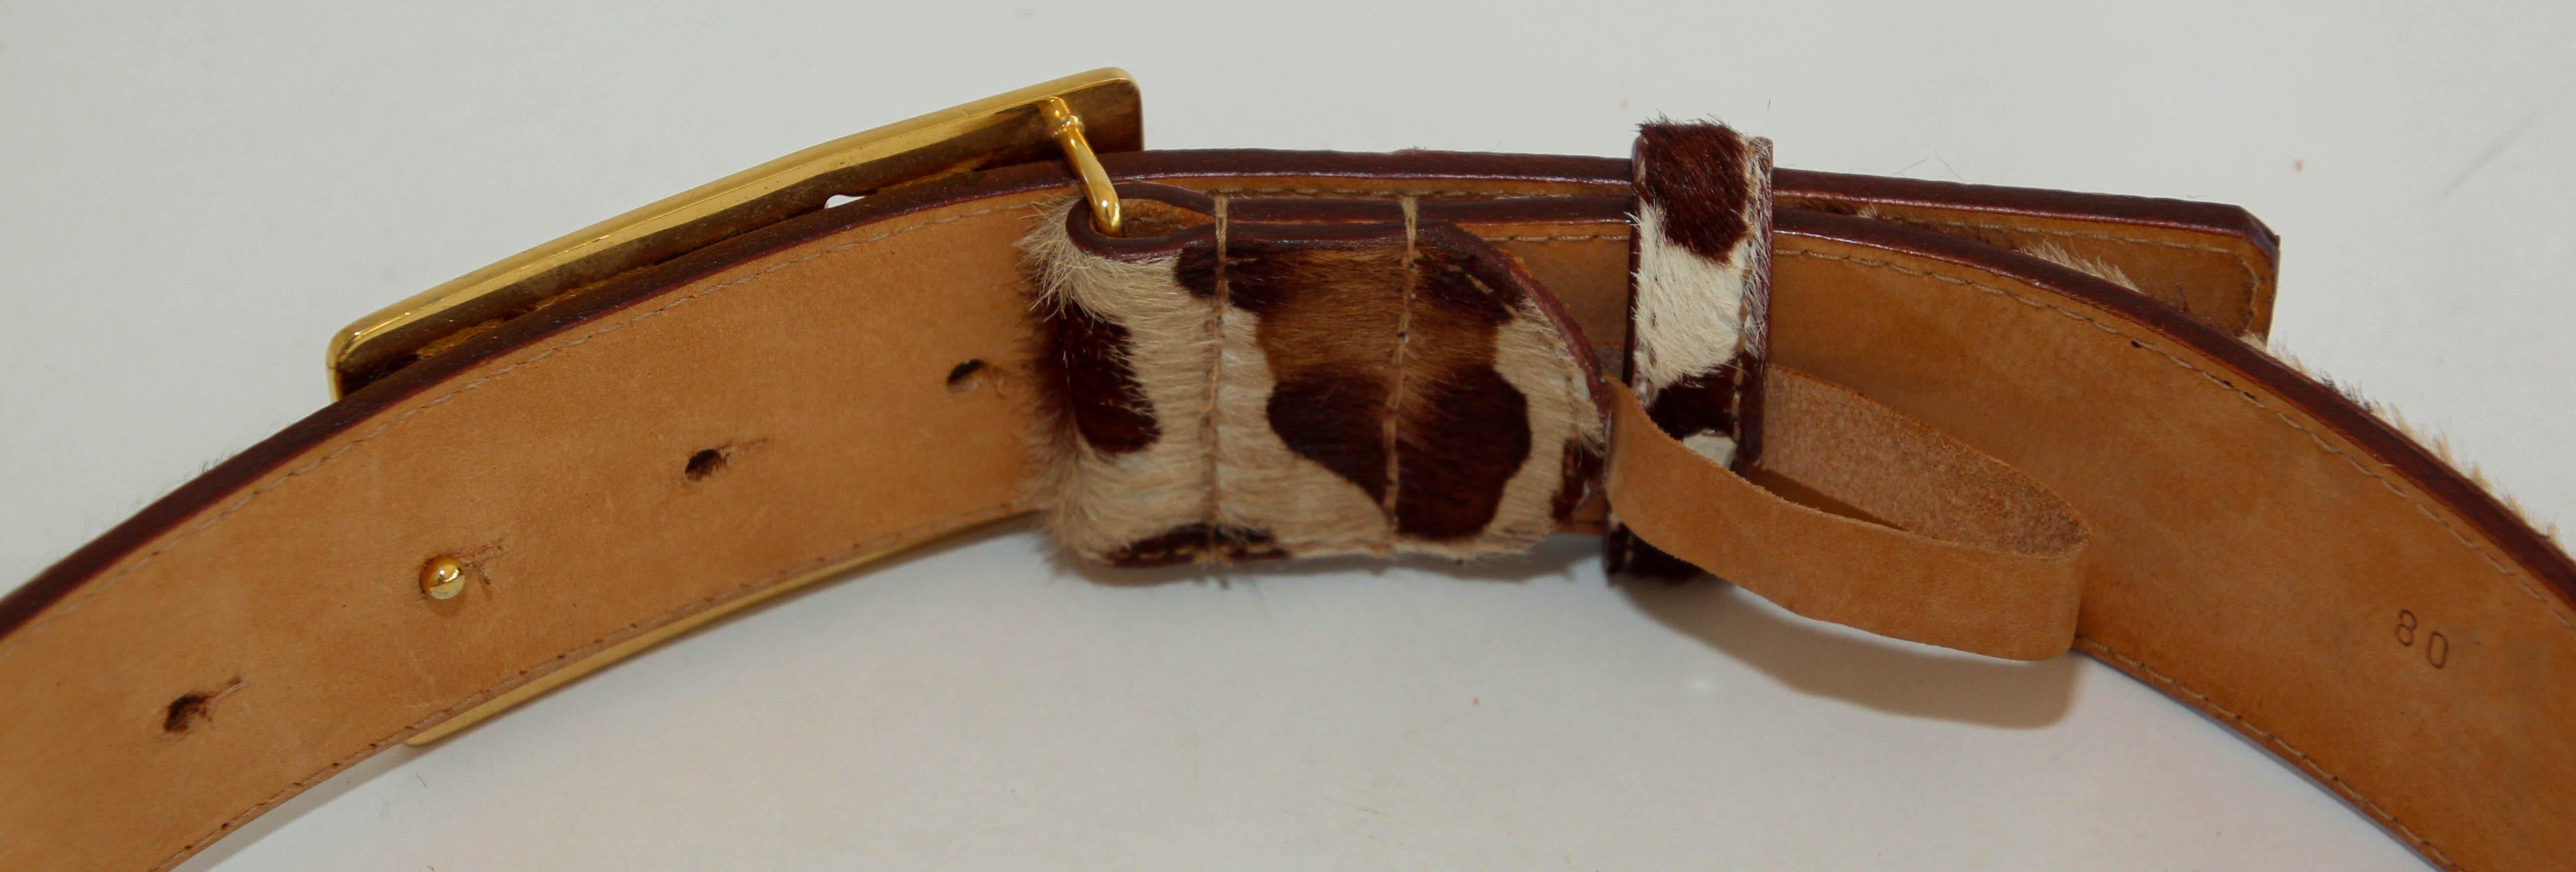 ETRO Leopard-Print Leather Belt with the Iconic Pegaso Brass Buckle For Sale 5